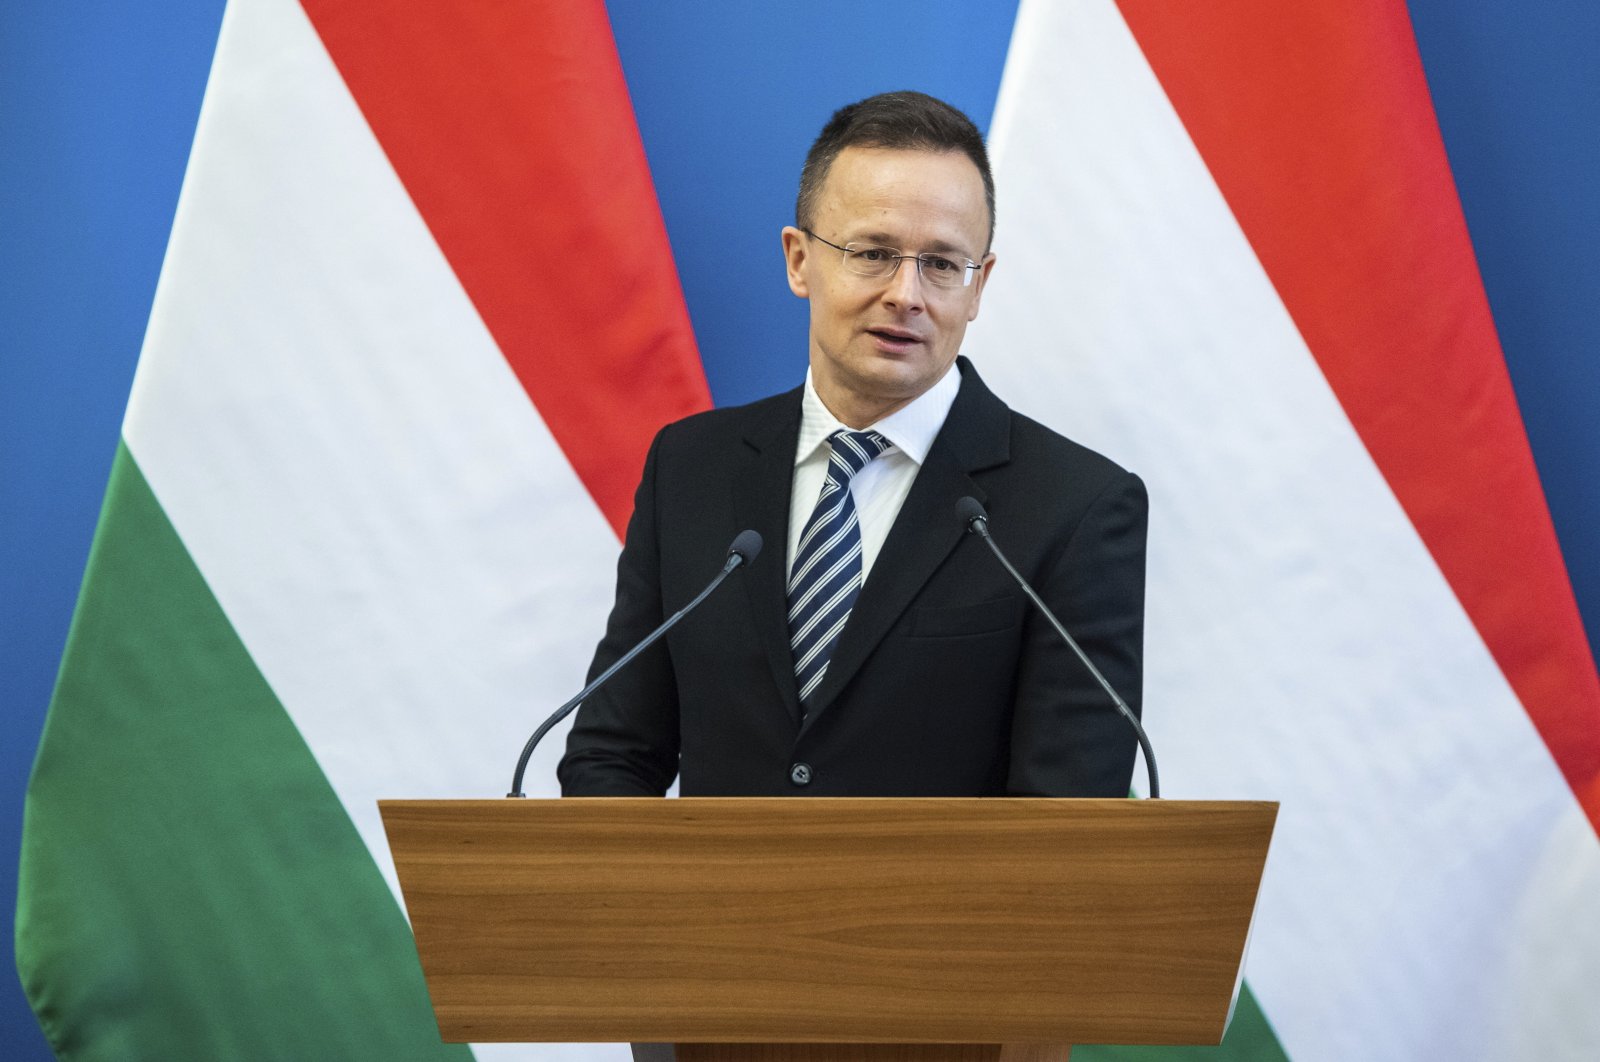 Hungarian Minister of Foreign Affairs and Trade Peter Szijjarto holds a joint news conference with Mikayil Jabbarov, Minister of Economу of the Republic of Azerbaijan in Szijjarto&#039;s office in Budapest, Hungary, Tuesday, Jan. 24, 2023. (AP File Photo)